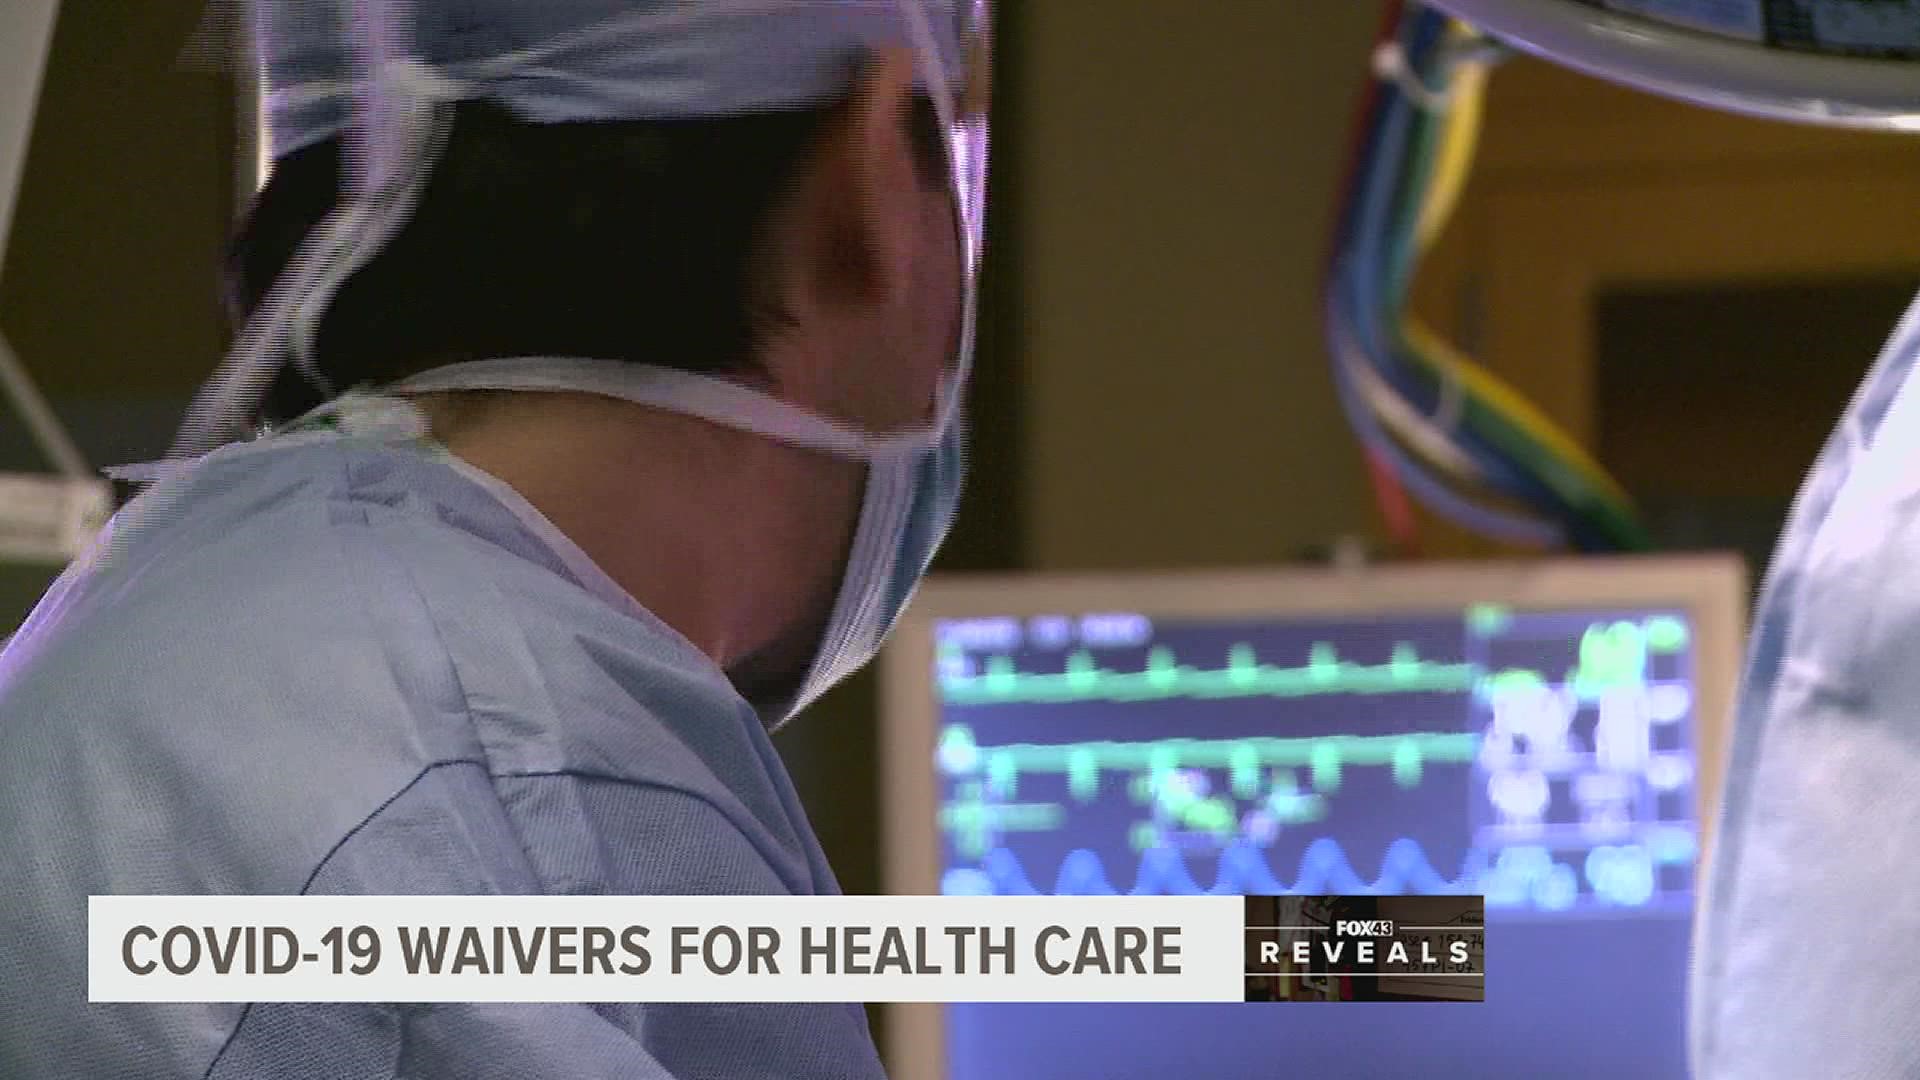 FOX43 Reveals which COVID-19 waivers might have a good chance at staying in place as health care providers fight to make them permanent.